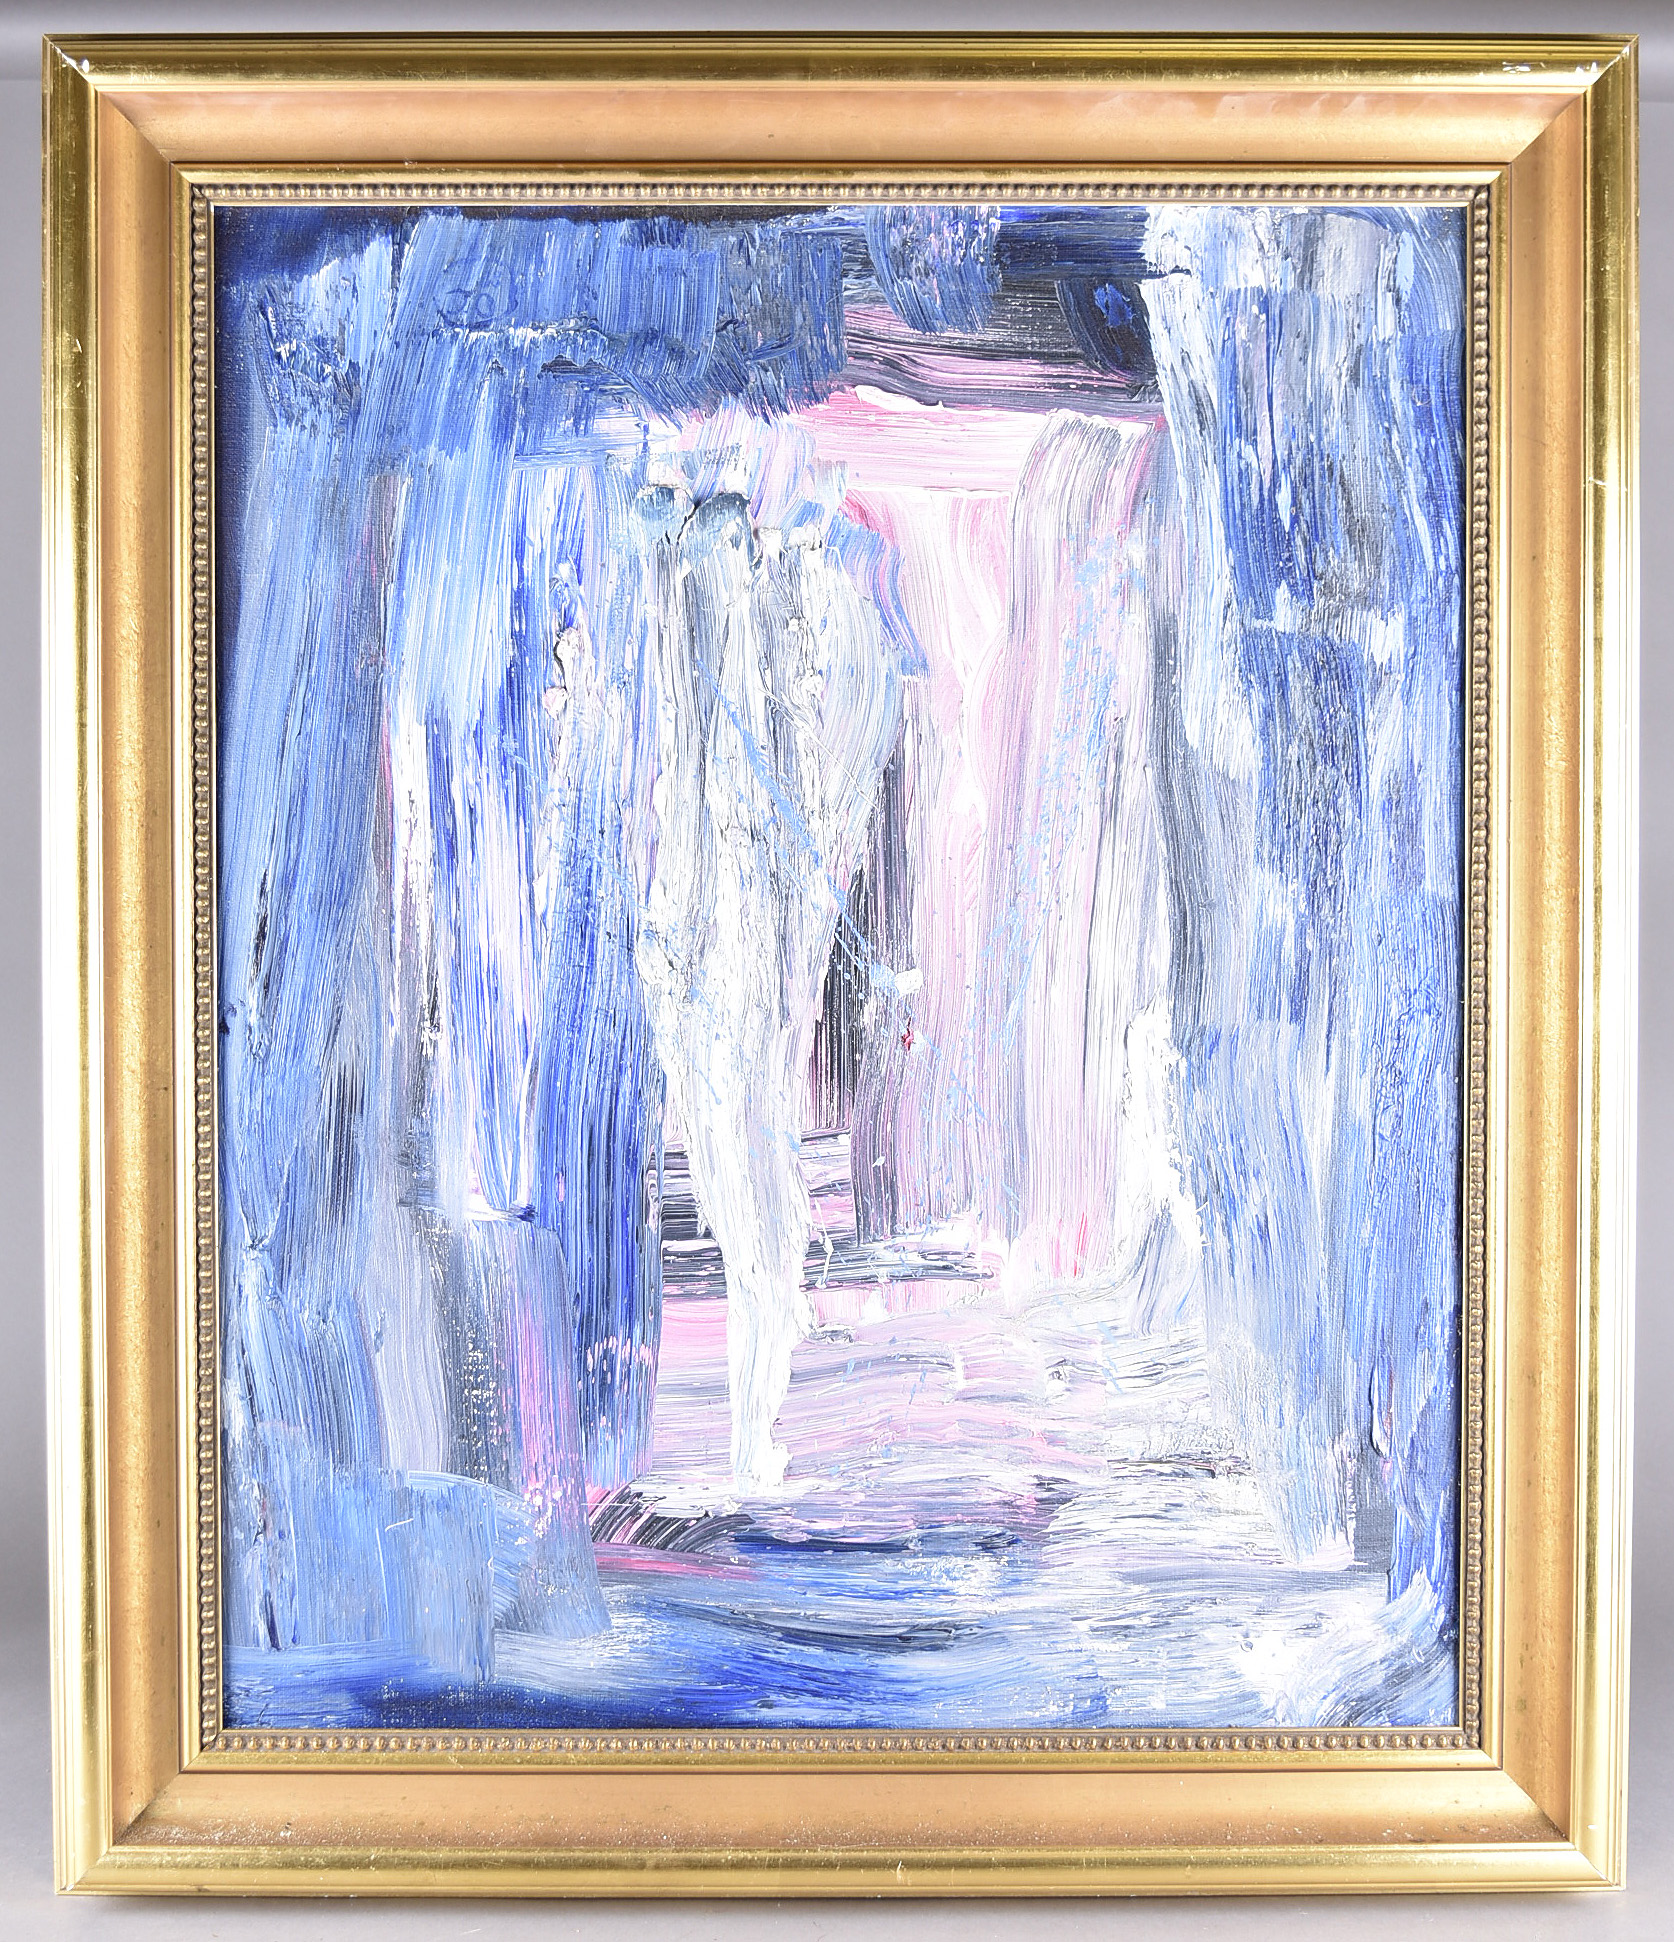 20th Century Scandinavian School oil on canvas, 'Abstract in Blues, Pinks and Whites', inscribed ' - Image 2 of 2